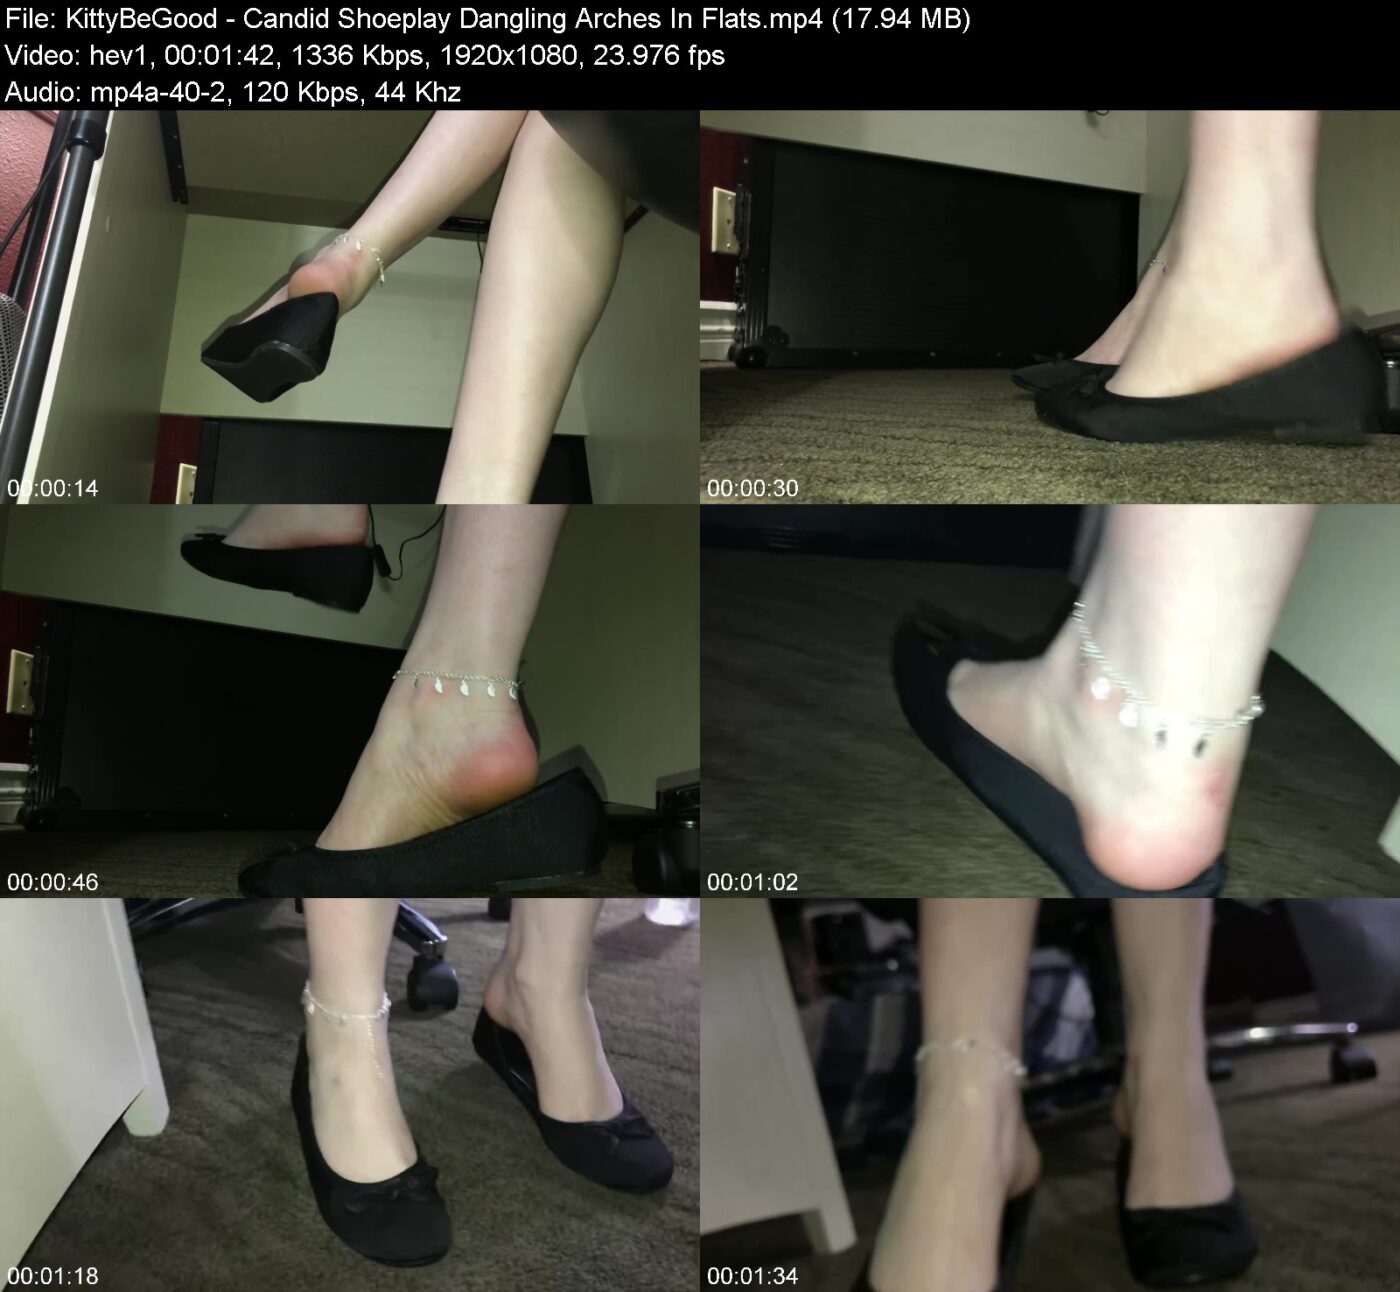 KittyBeGood in Candid Shoeplay Dangling Arches In Flats